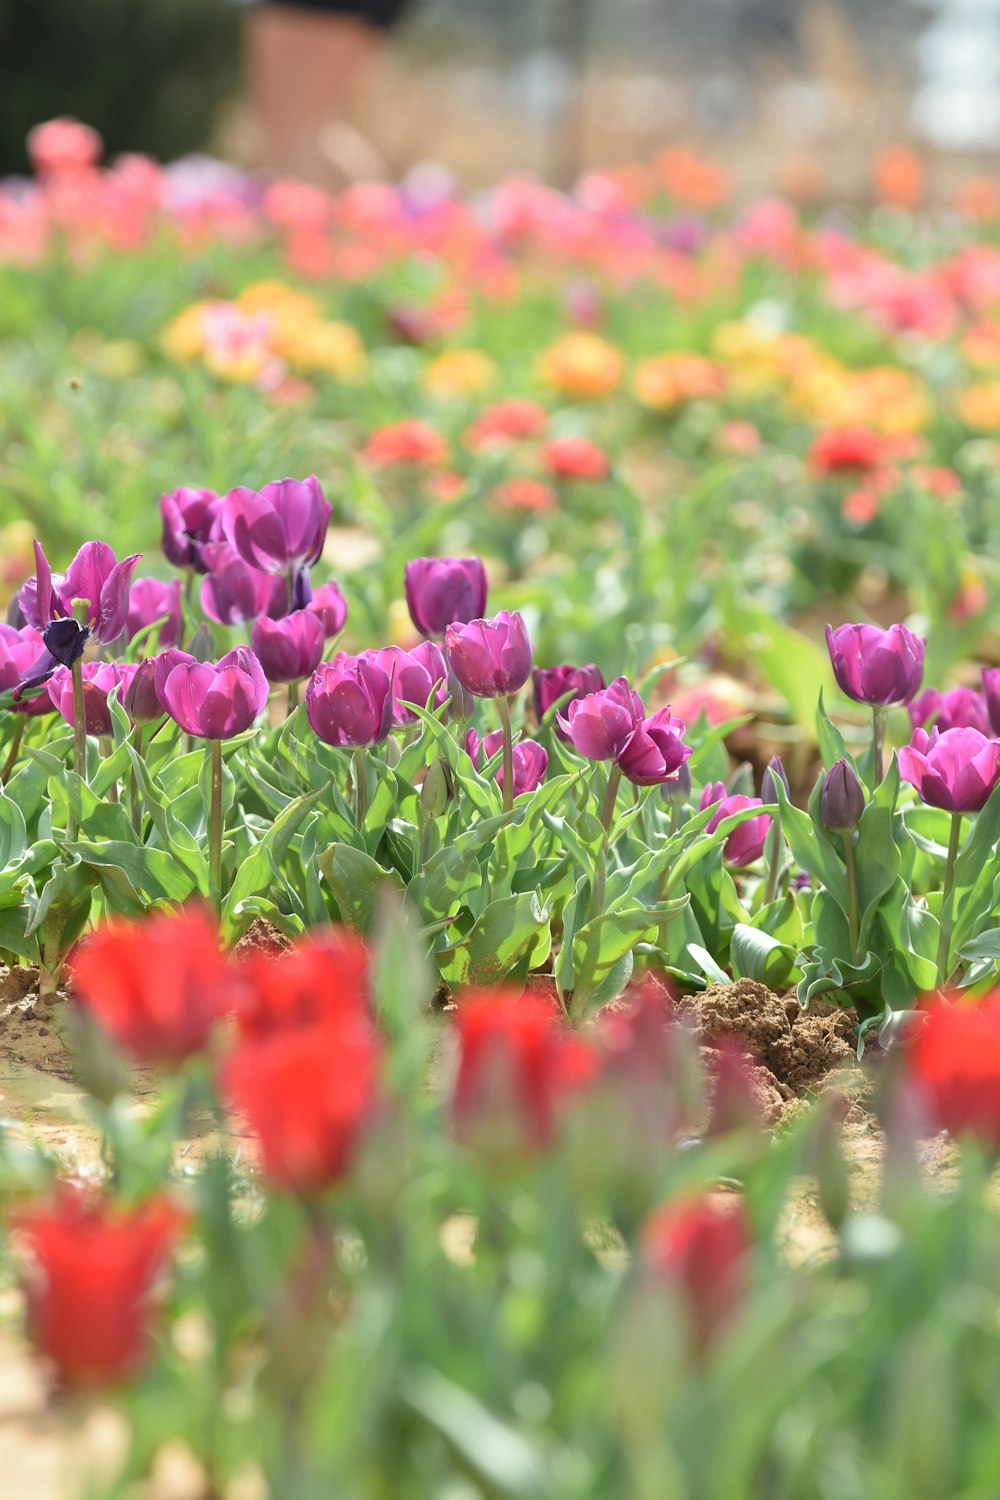 a field full of colorful tulips and other flowers